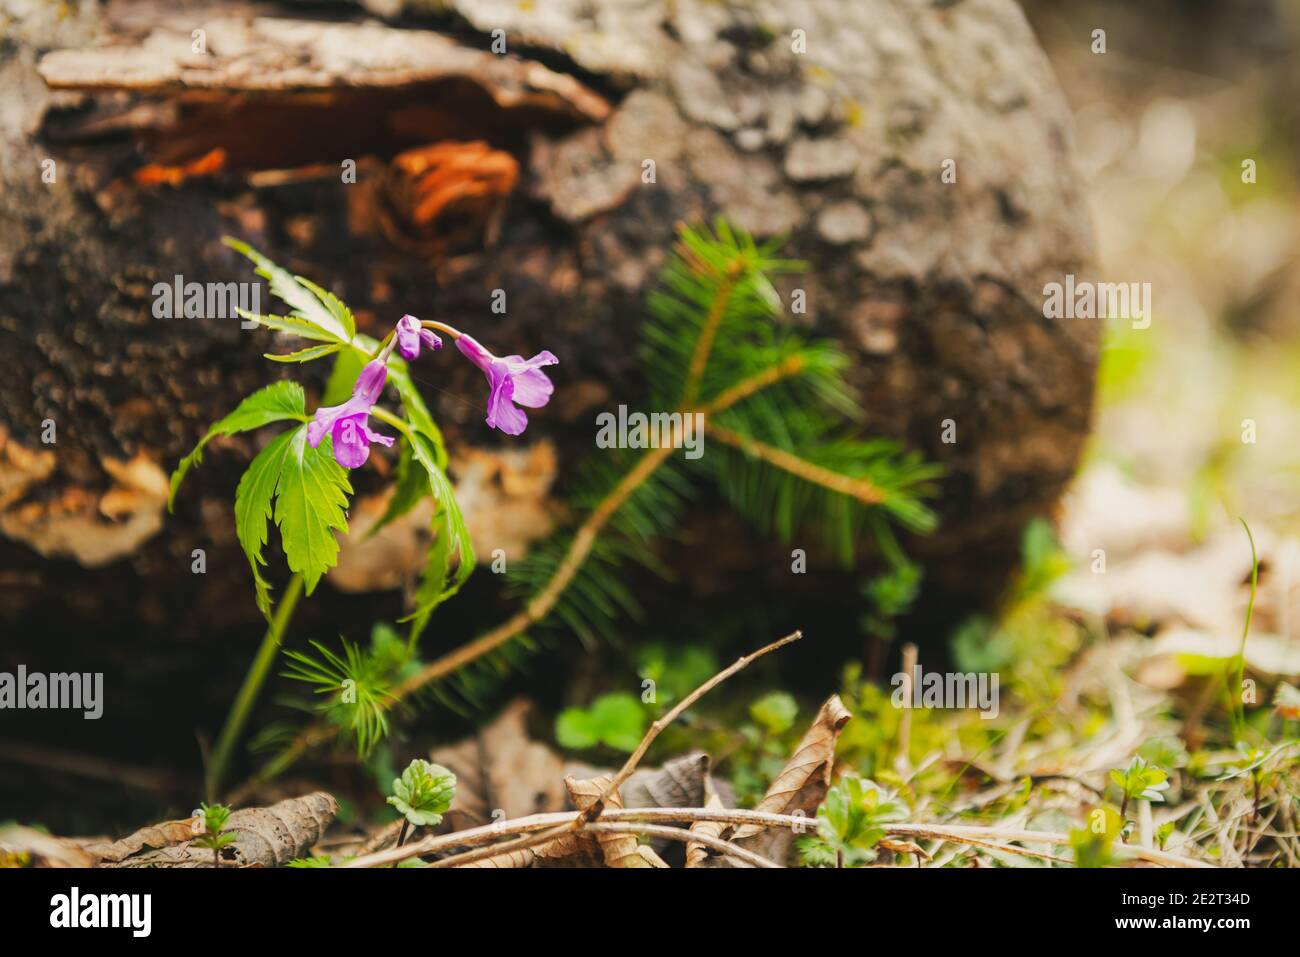 Close up of a cutleaf toothwort (Cardamine pentaphyllos) flower in spring with decaying wood in the background. Stock Photo